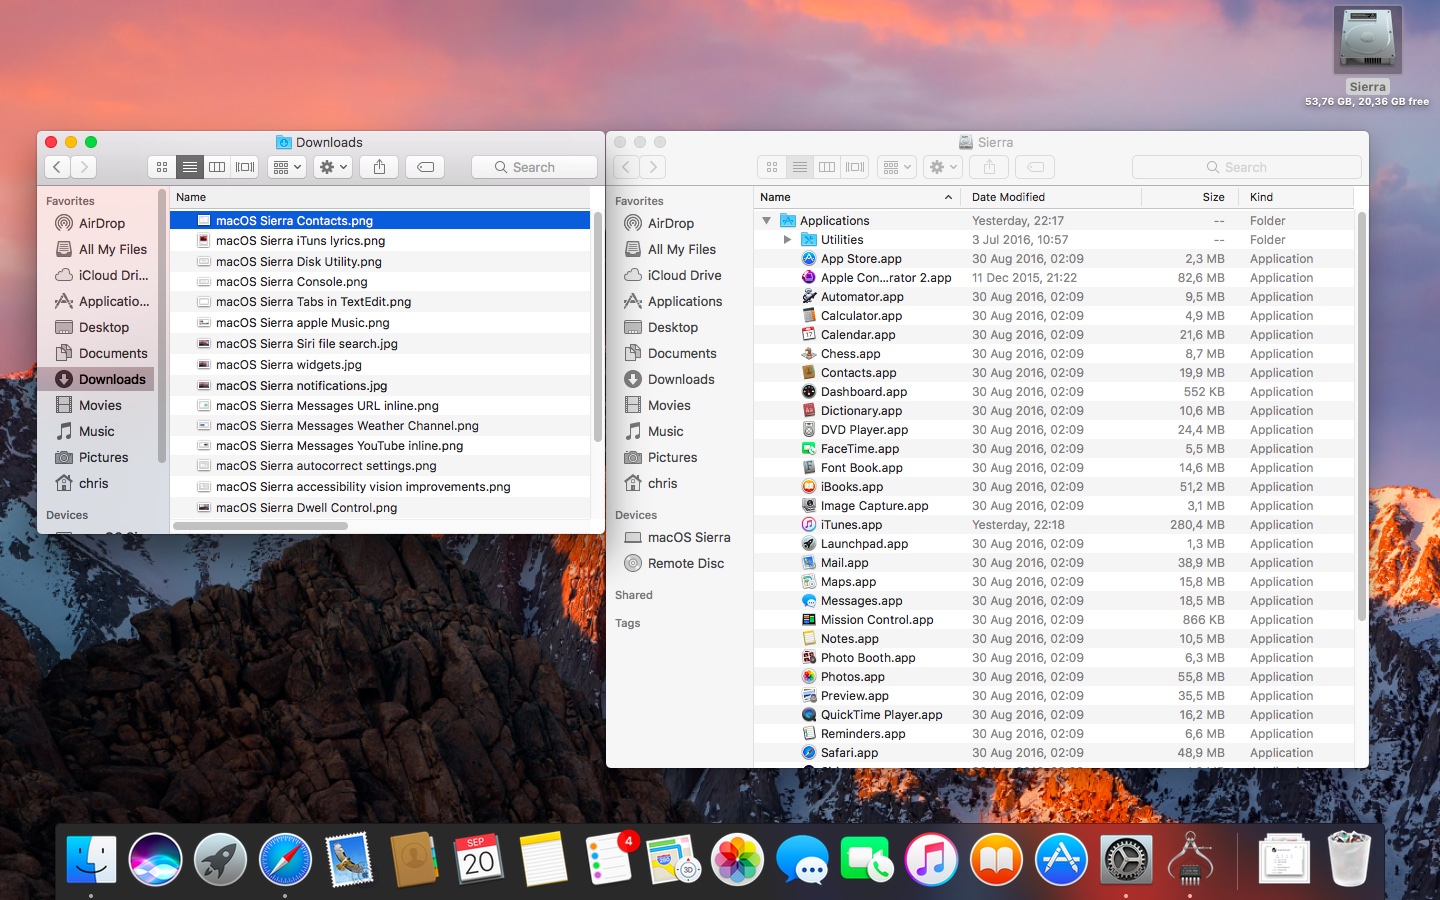 where are notes for mac os sierra